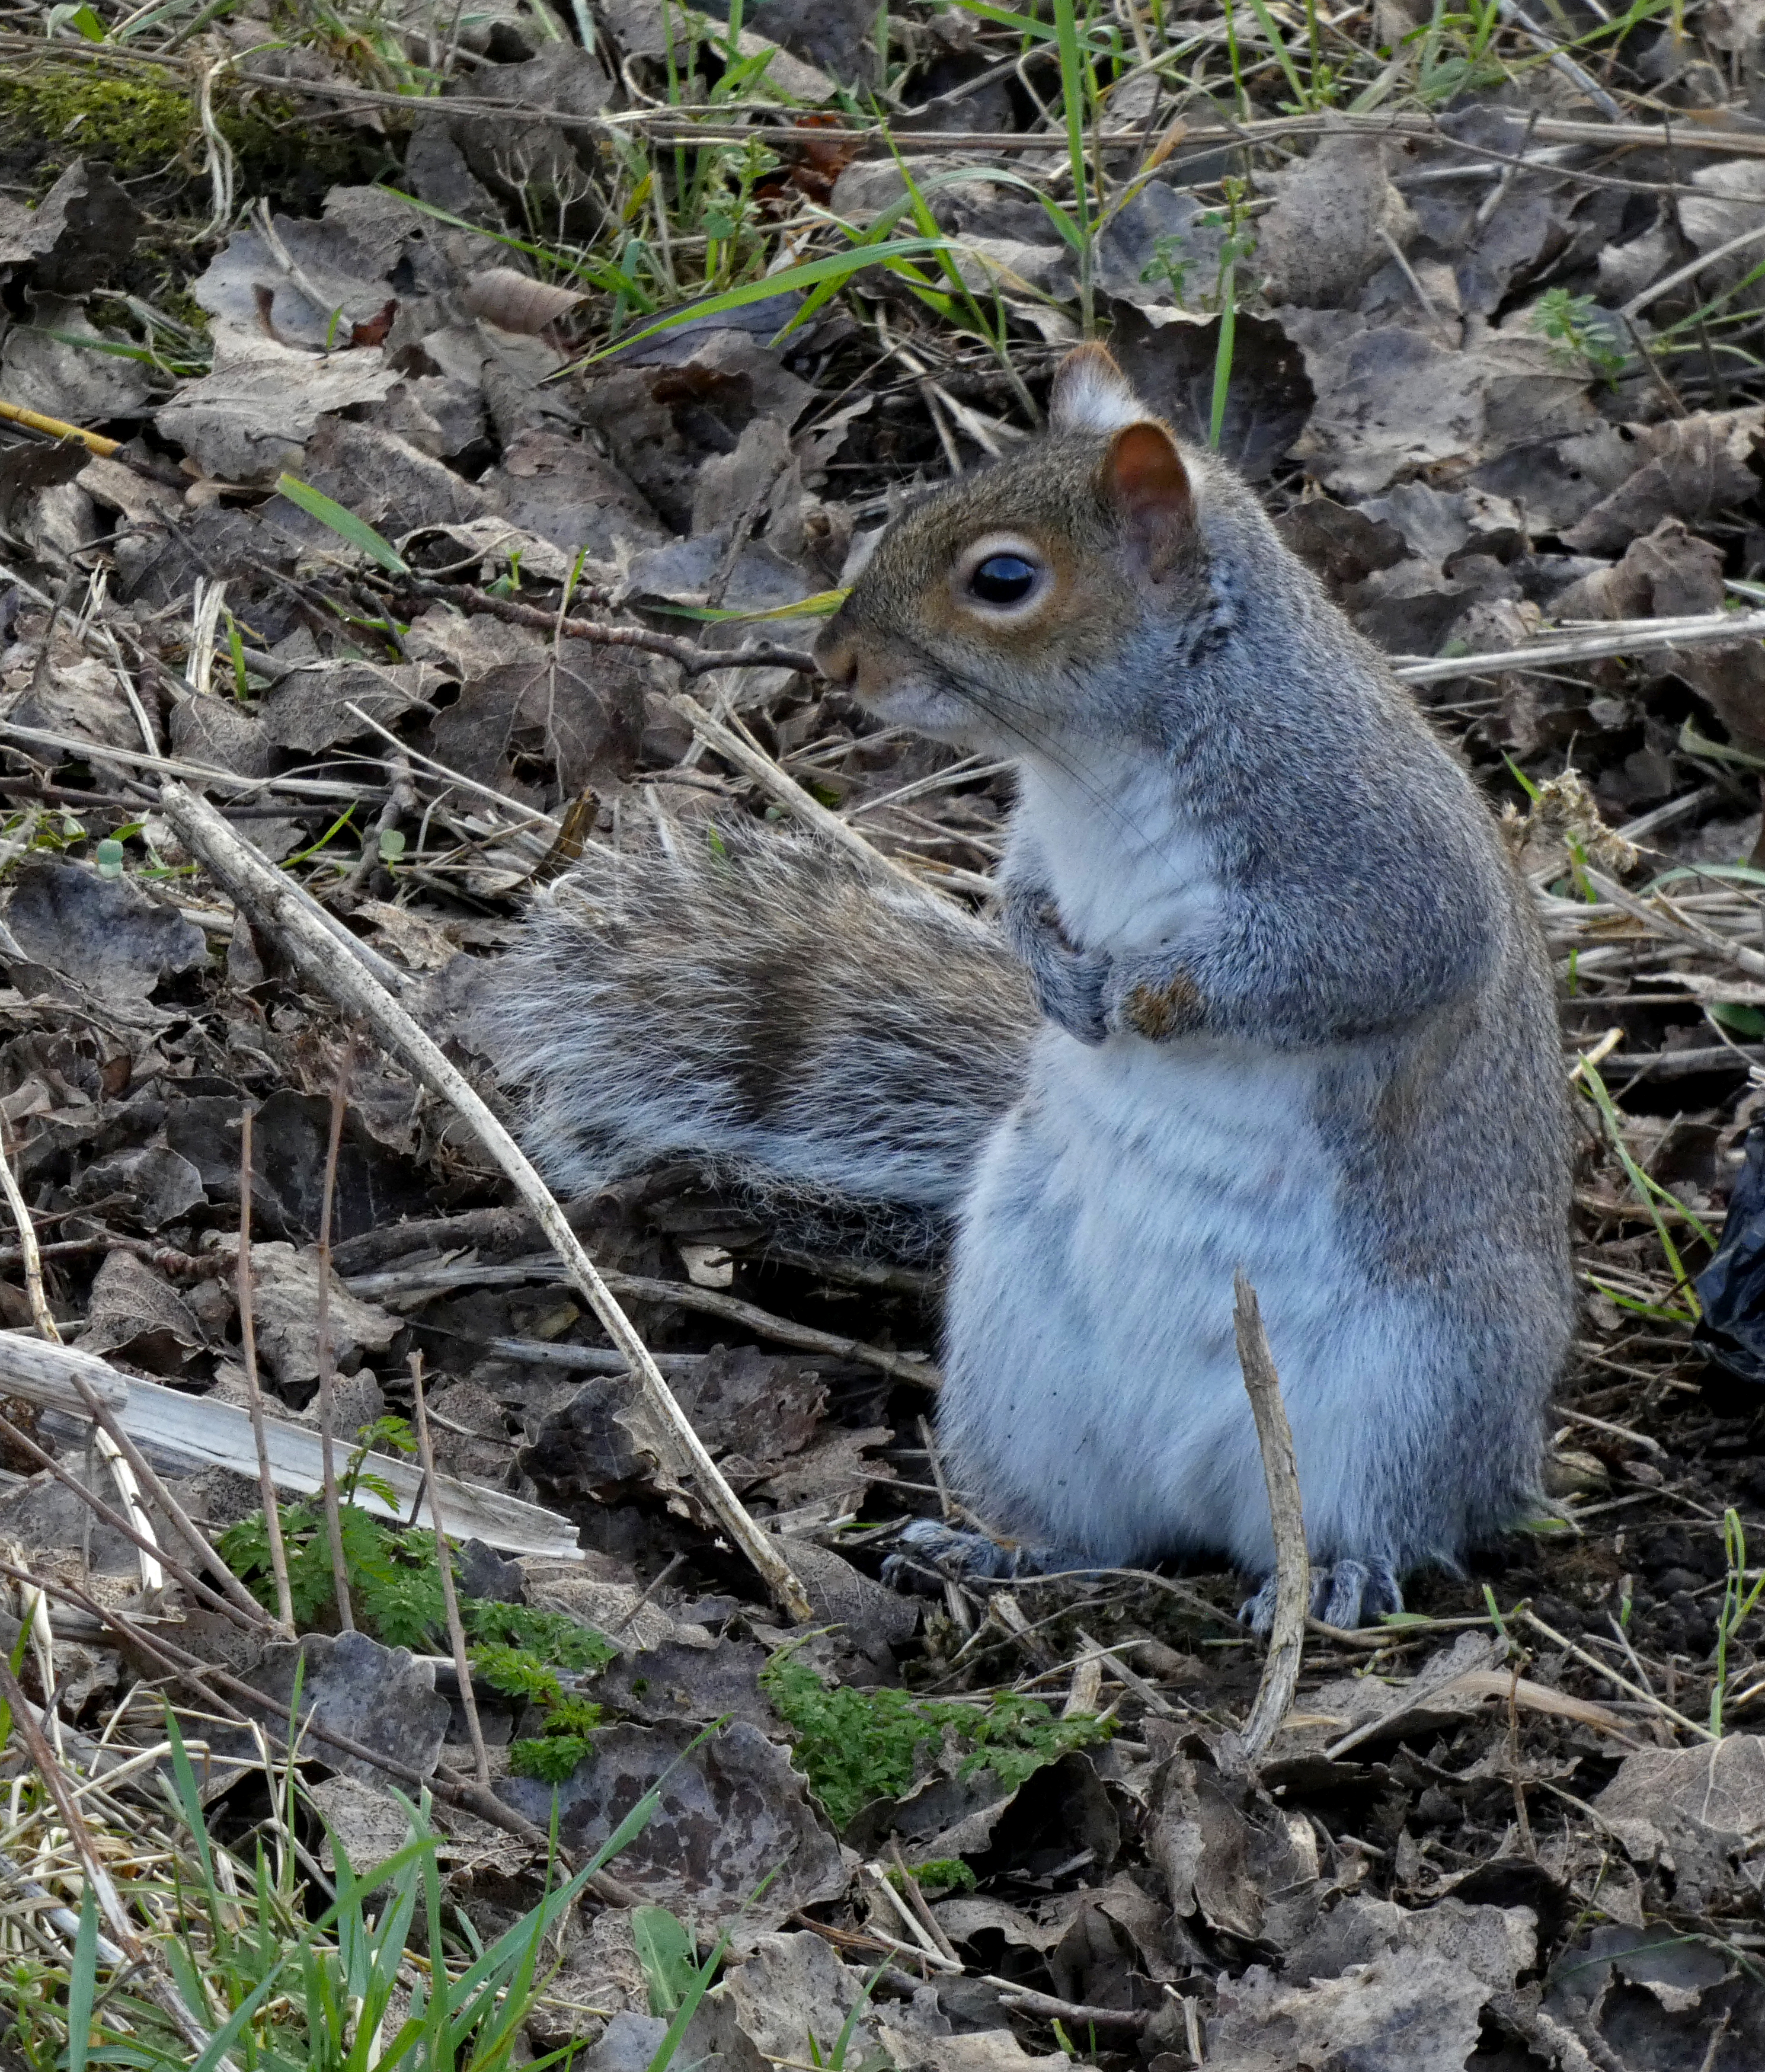 A Tame Squirrel In Saltaire, Saltaire Canal and River, 7th February 2023